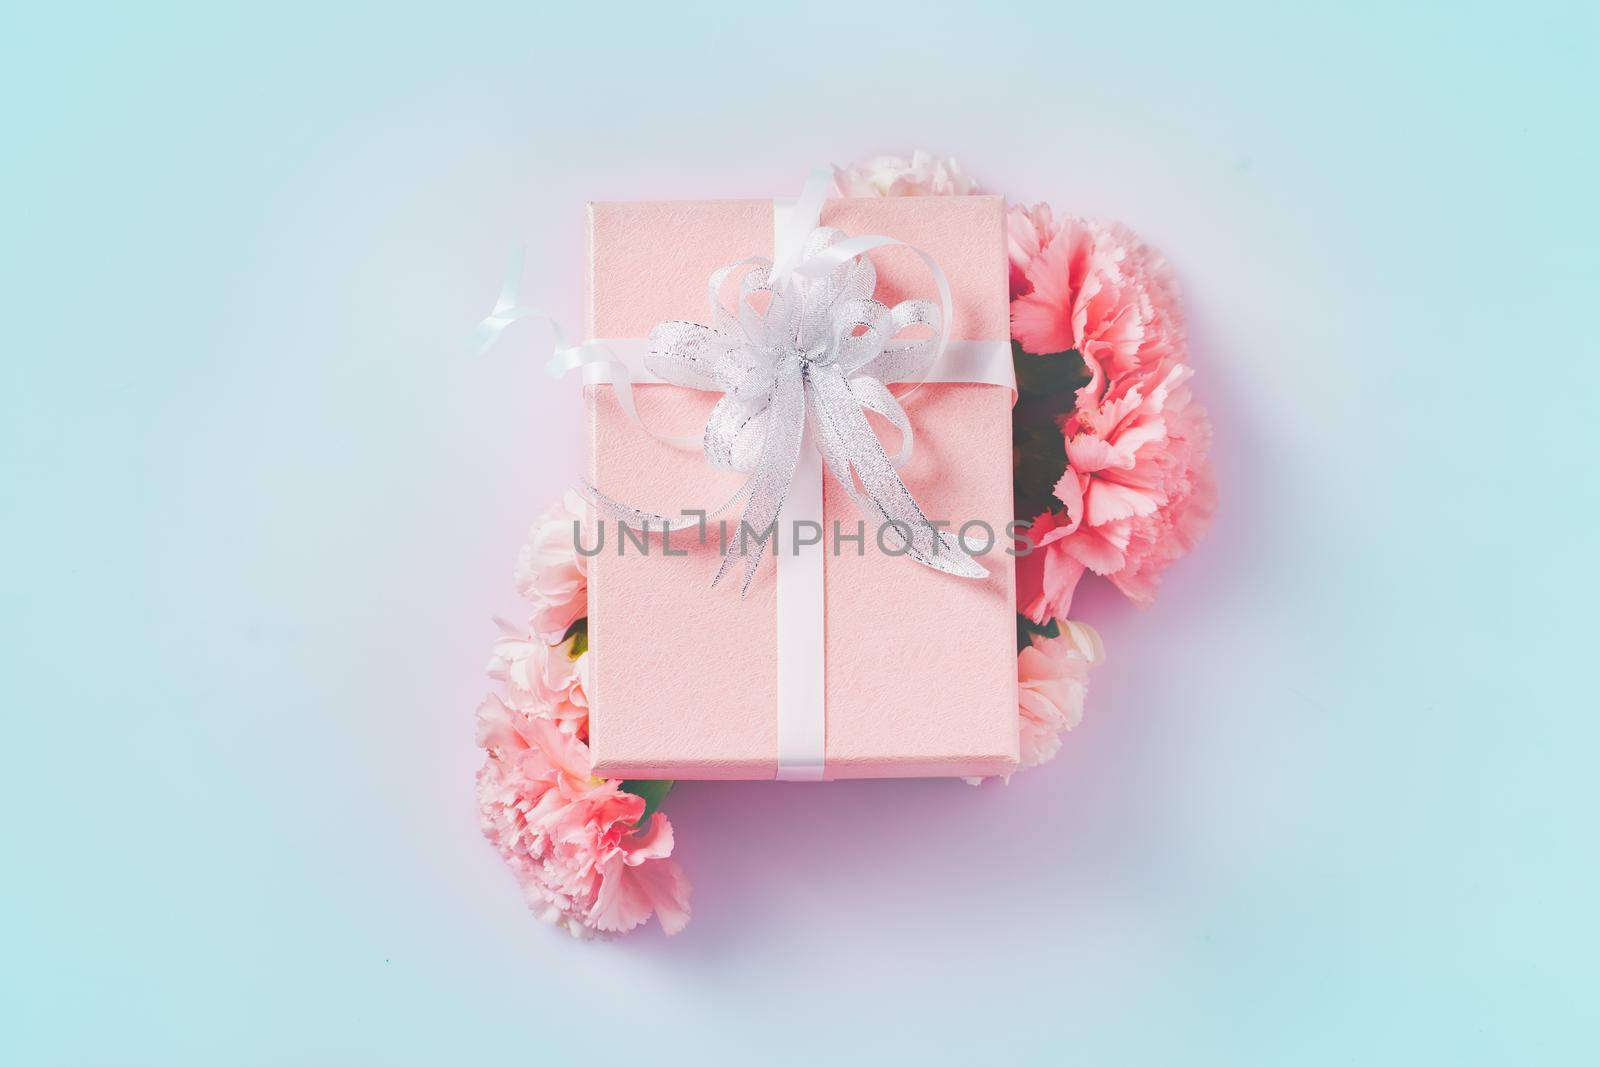 Carnation with gift box.  Mother Day concept, Sweet filter